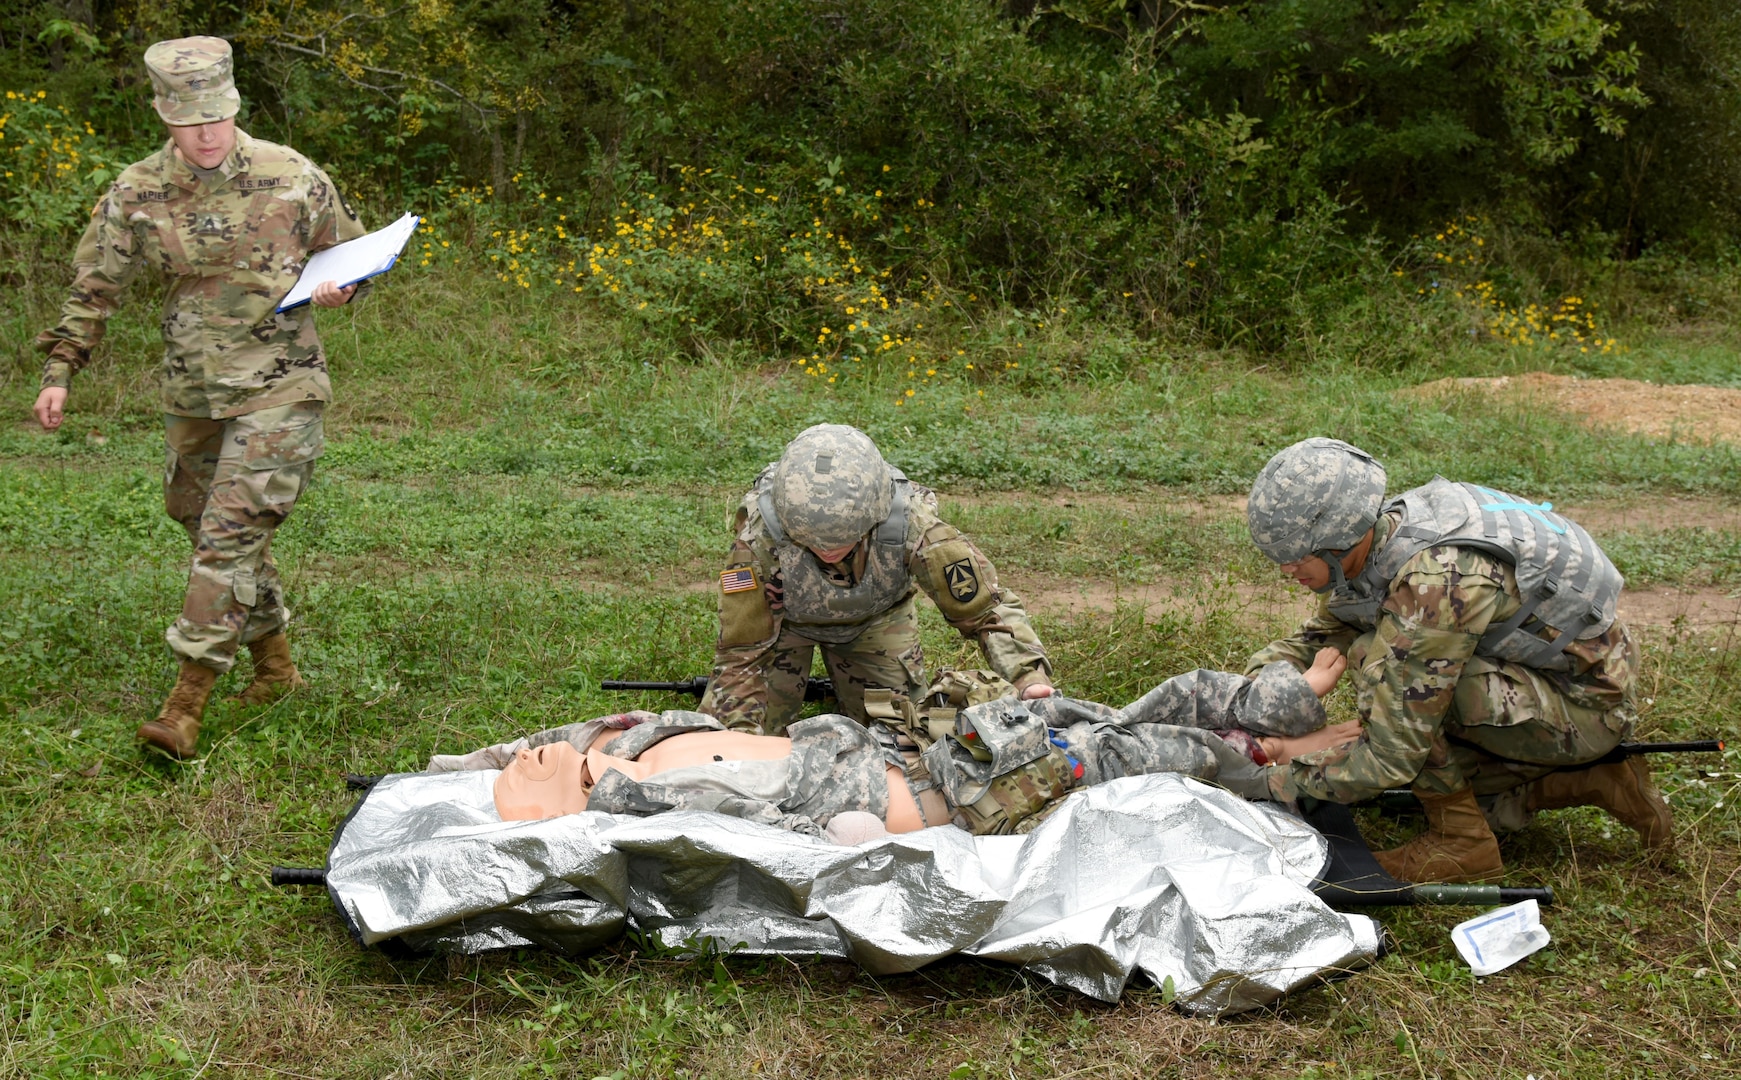 Staff Sgt. Rachel Hammill (center) and Cpl. Christopher Olverson prepare a wounded Soldier for medical evacuation as Sgt. Claudia Napier, lane non-commissioned officer in charge, observes and evaluates the assigned task. The U.S. Army Institute of Surgical Research at Joint Base San Antonio-Fort Sam Houston conducted Army Warrior Training at Salado Creek Training site at JBSA-Fort Sam Houston Oct. 23-24.